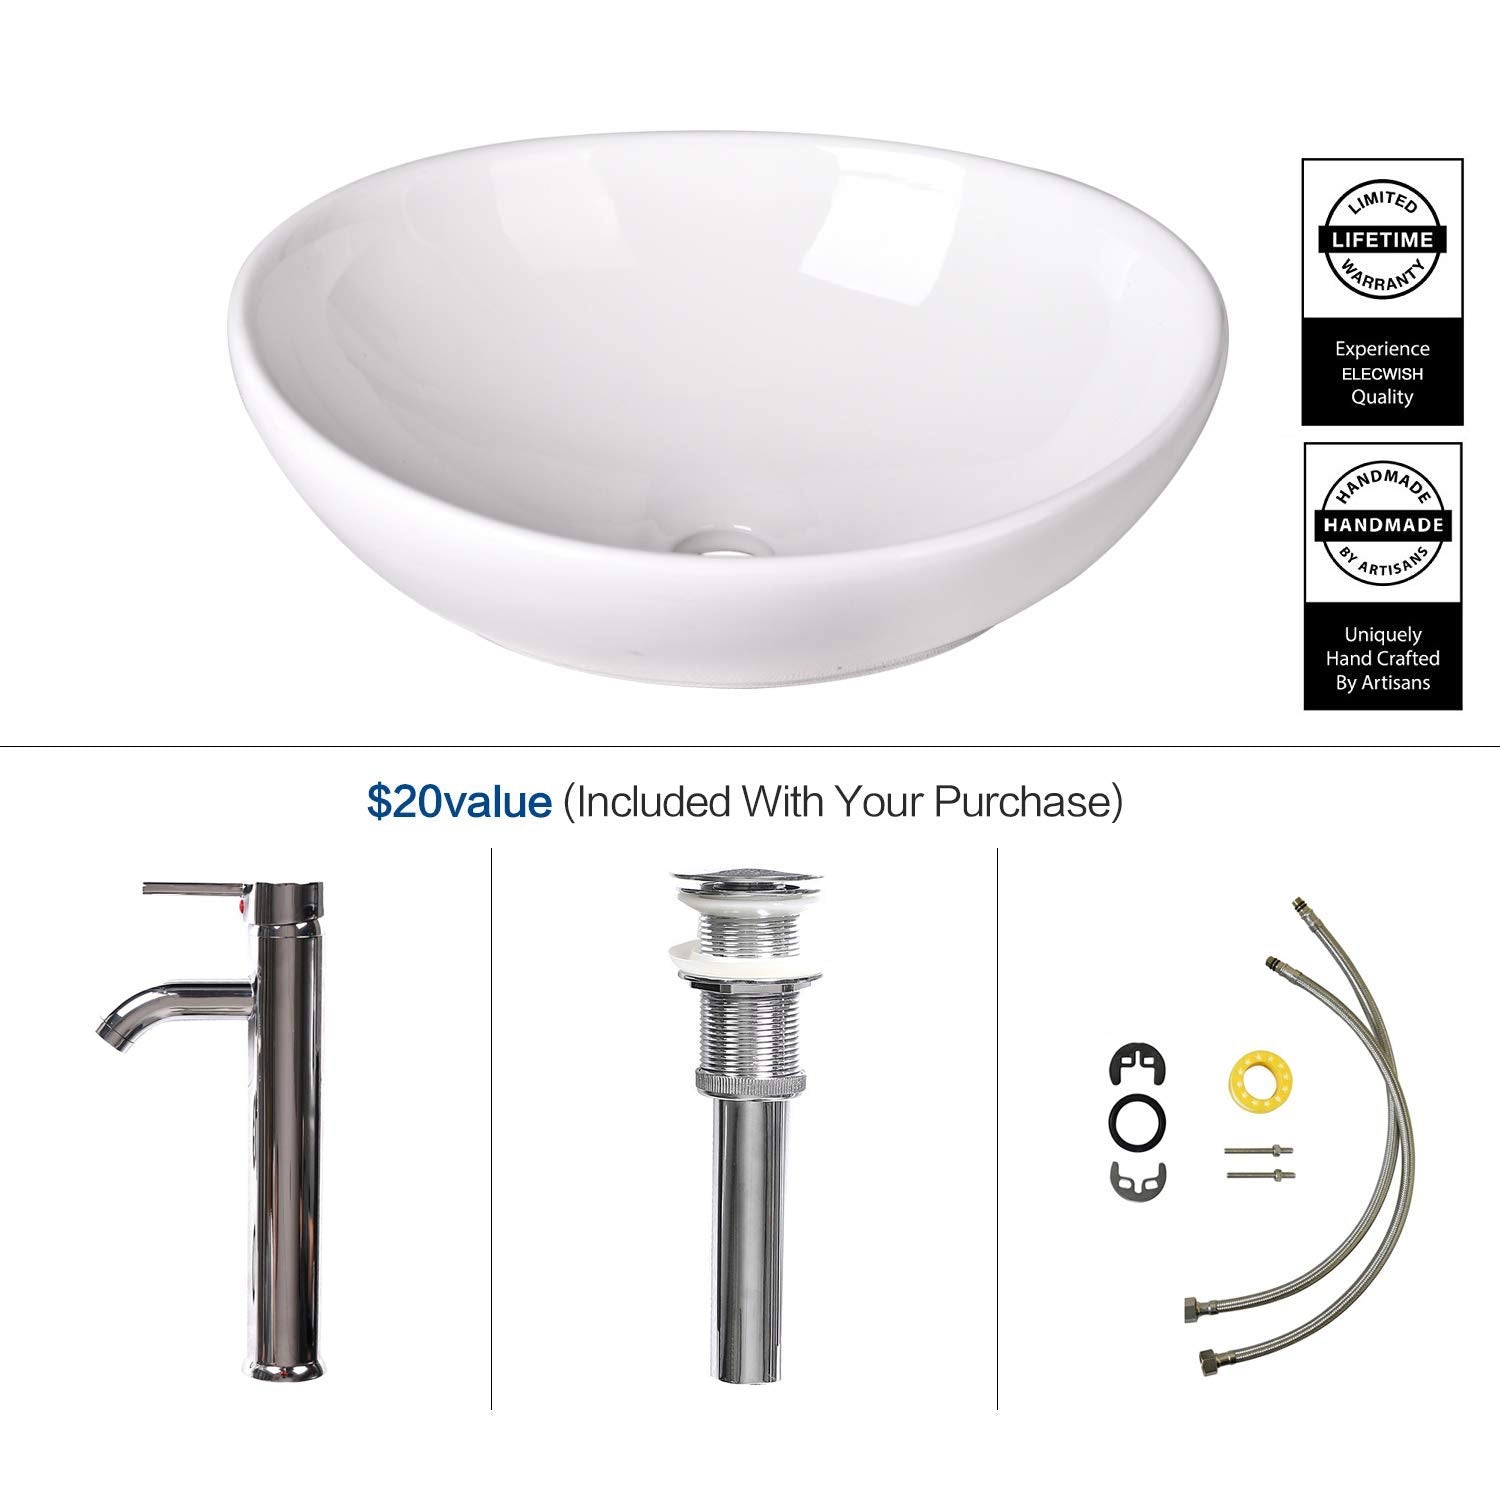 Elecwish White Oval Ceramic Sink included parts